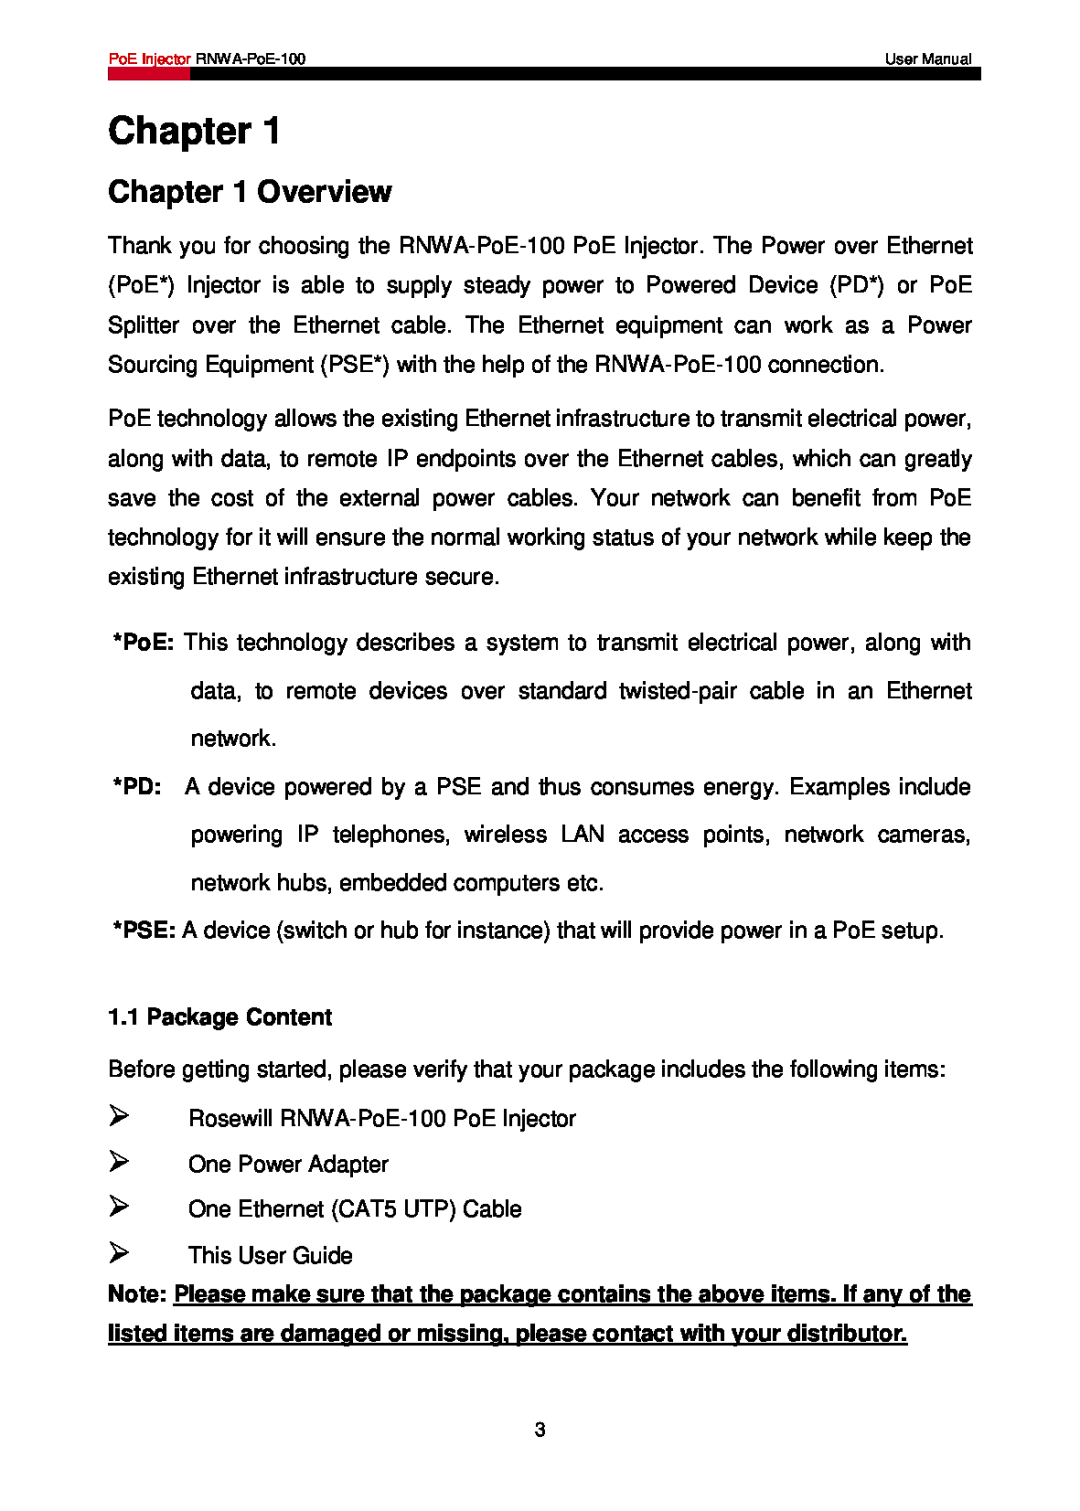 Rosewill RNWA-PoE-100 user manual Chapter, Overview, Package Content 